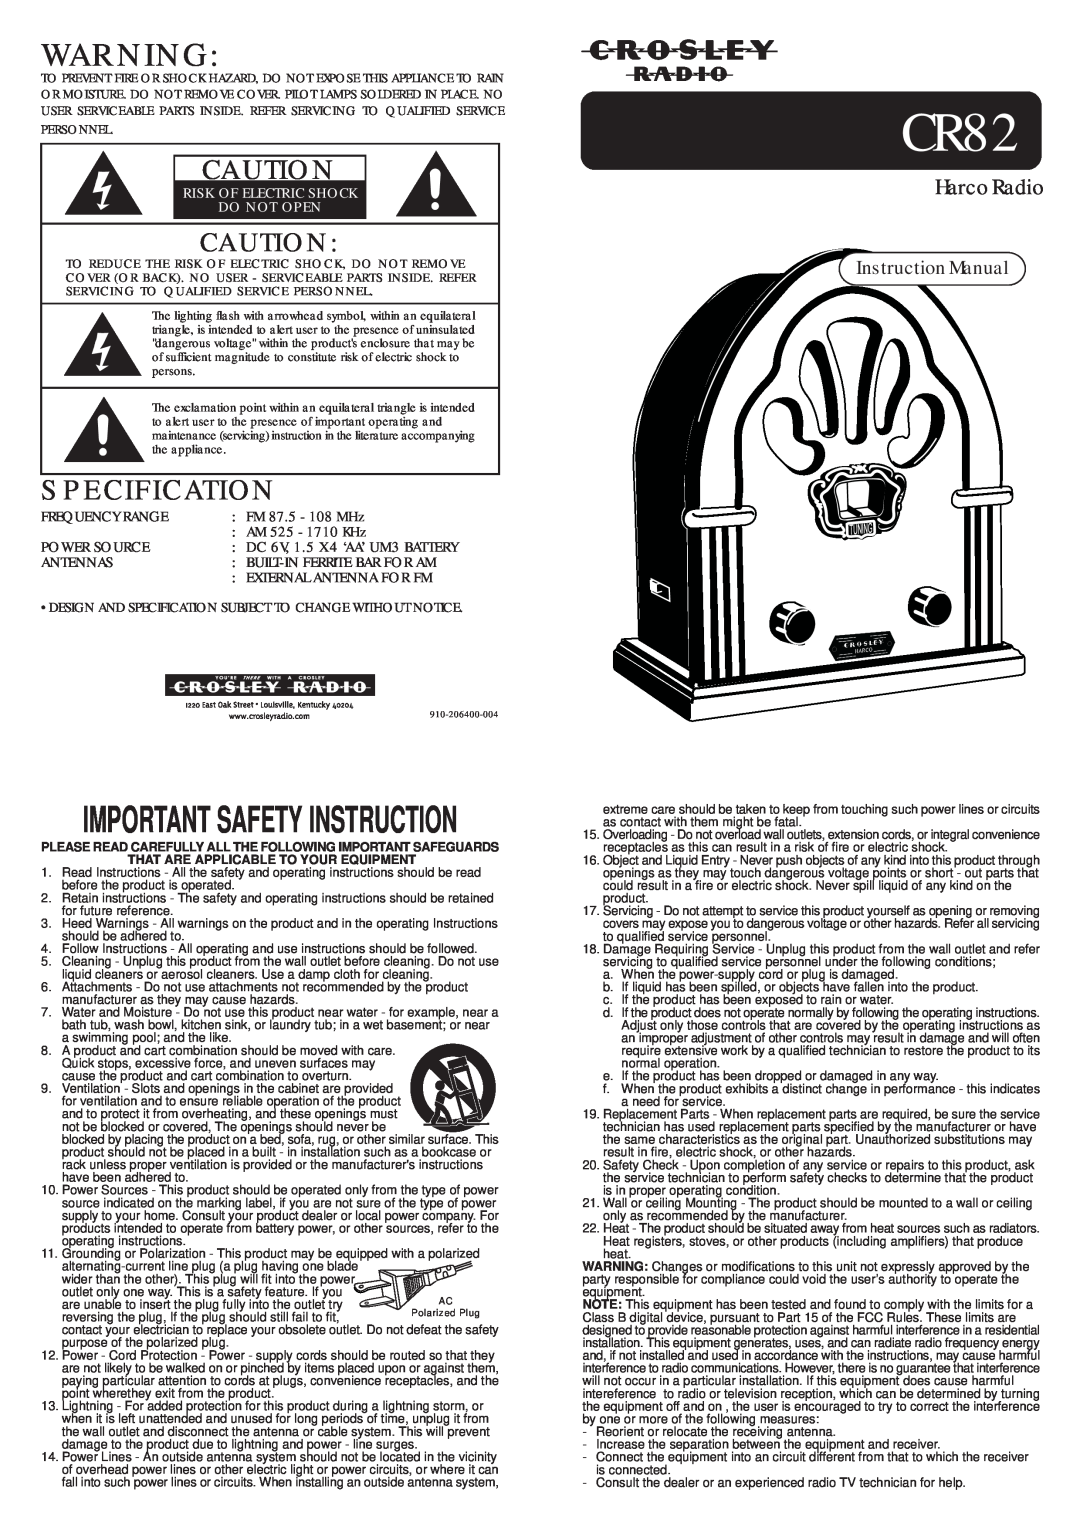 Crosley Radio CR82 instruction manual Specification, Important Safety Instruction, Harco Radio, Built-Inferrite Bar For Am 